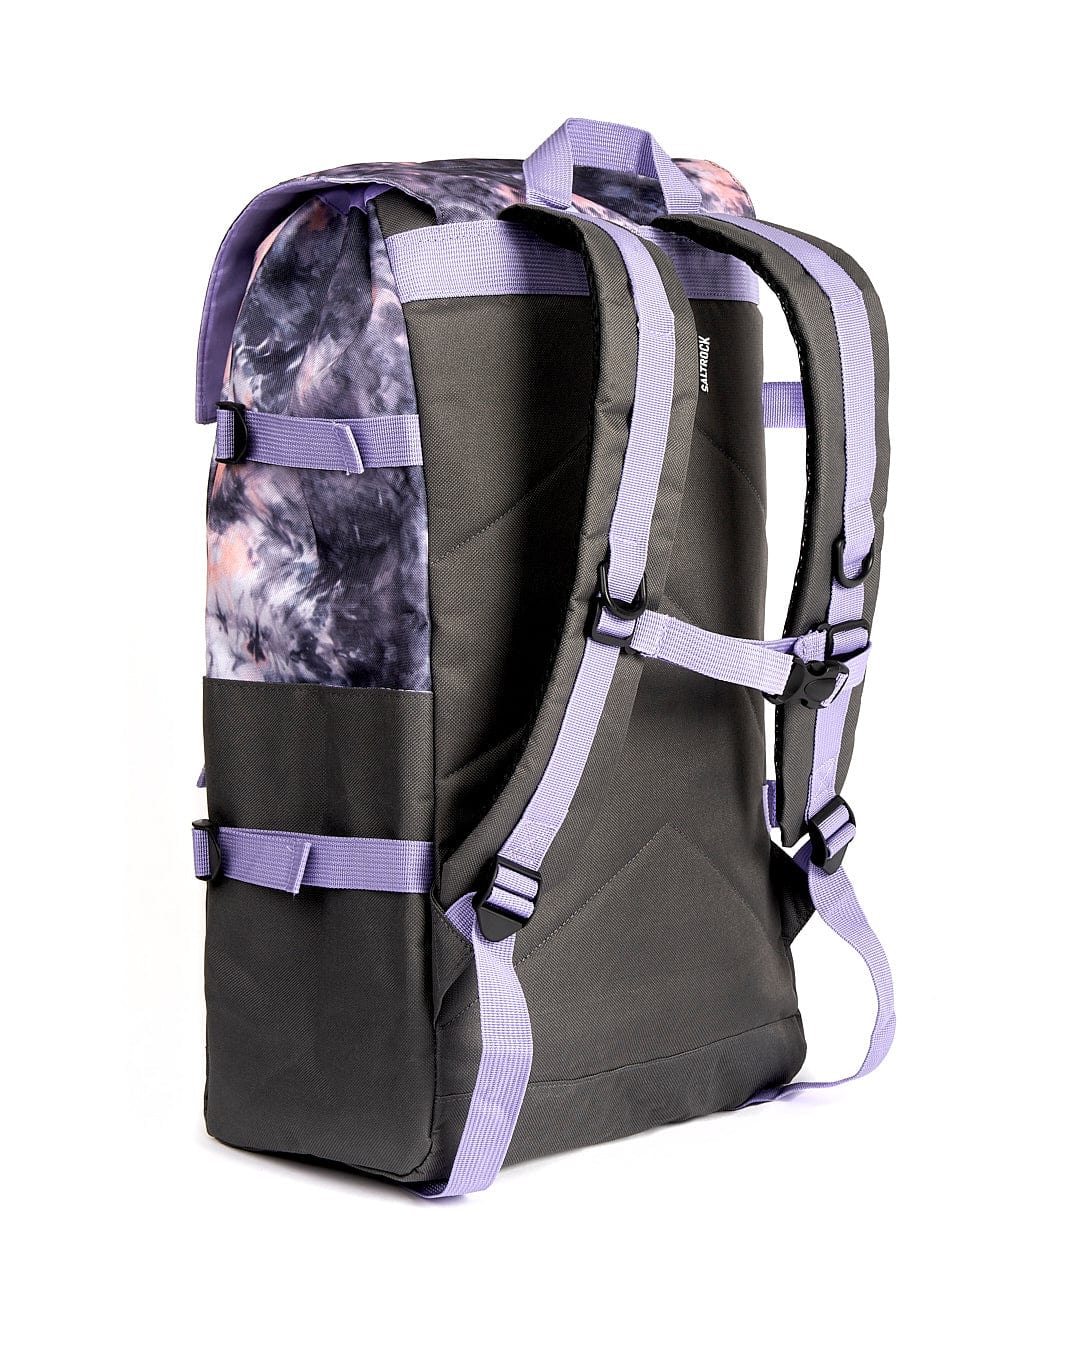 A Saltrock Top Loader - Backpack - Pink/purple with straps.